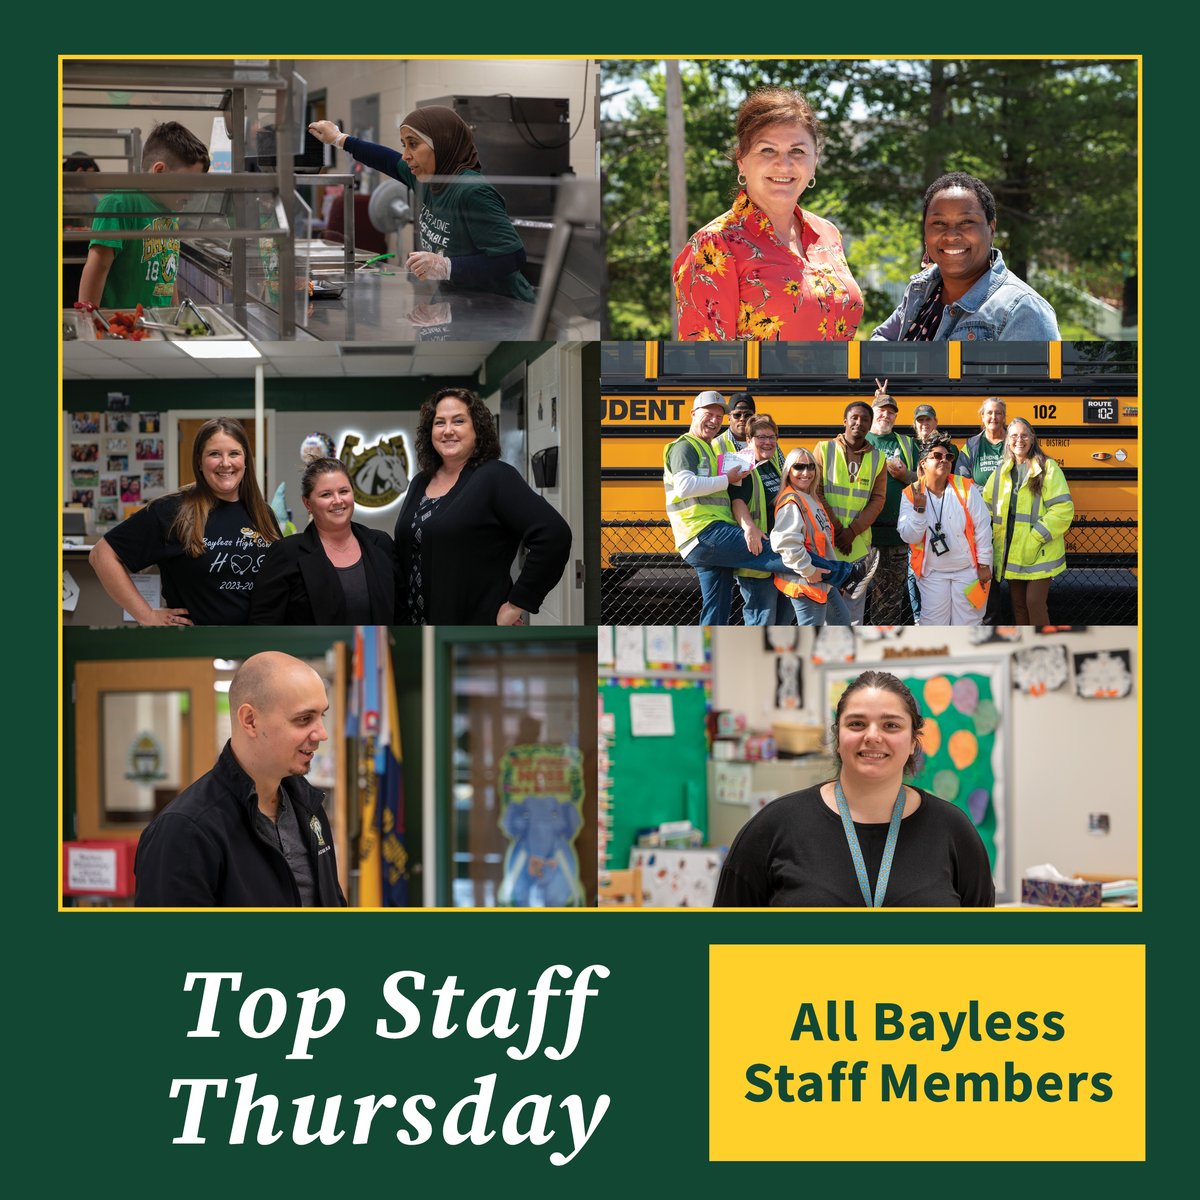 Today is the final #TopStaffThursday of the school year! These last 10+ months would not have been possible without the hard work of everyone on the Bayless staff. Our community could not be more thankful for them. #BringTheStampede